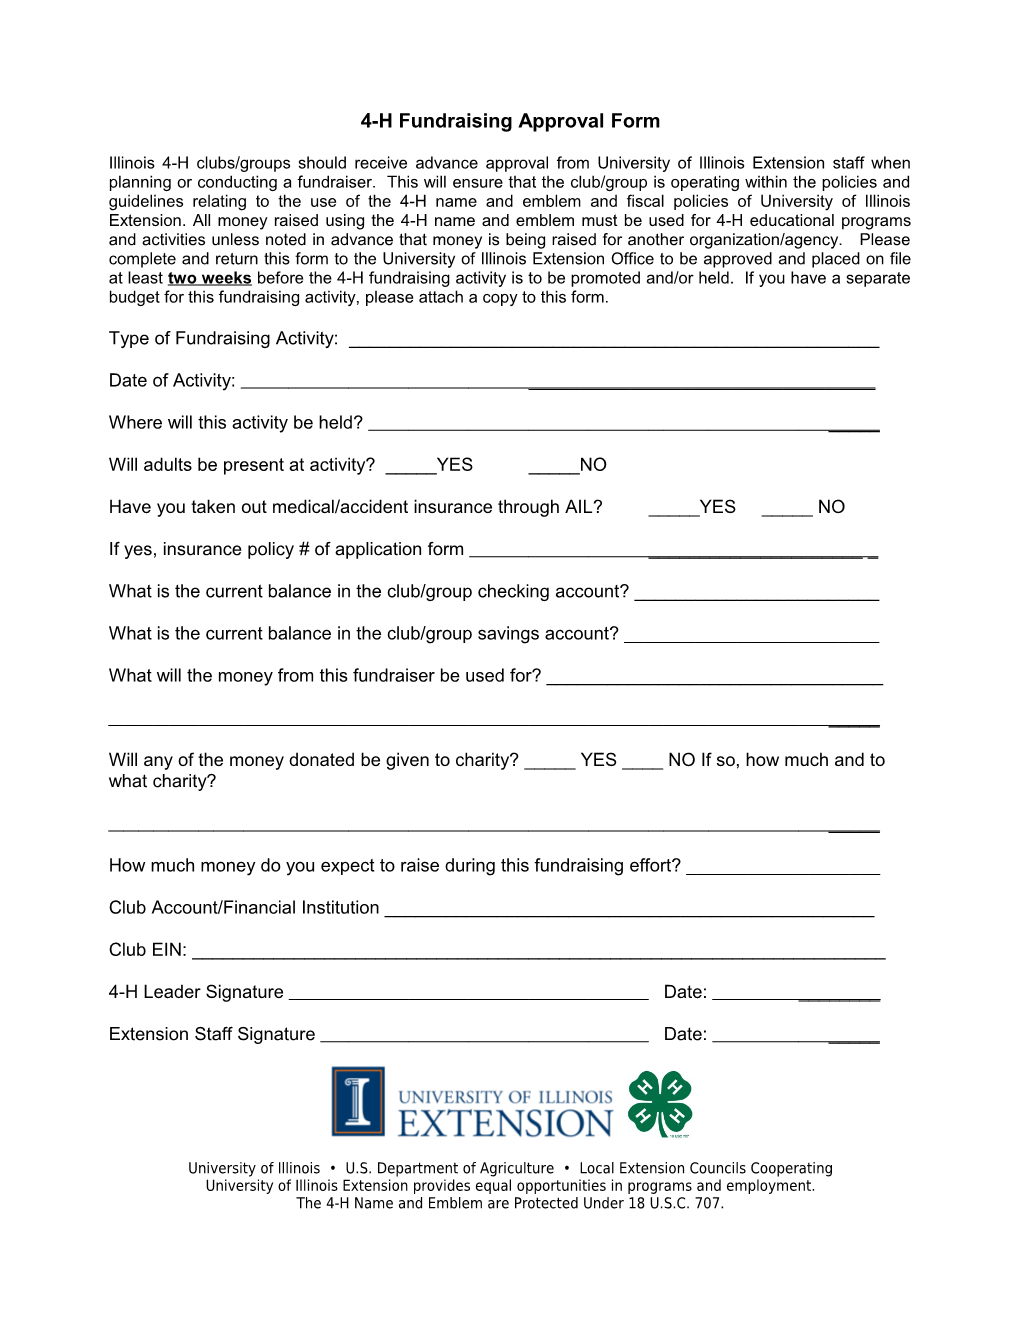 4-H Fundraising Approval Form